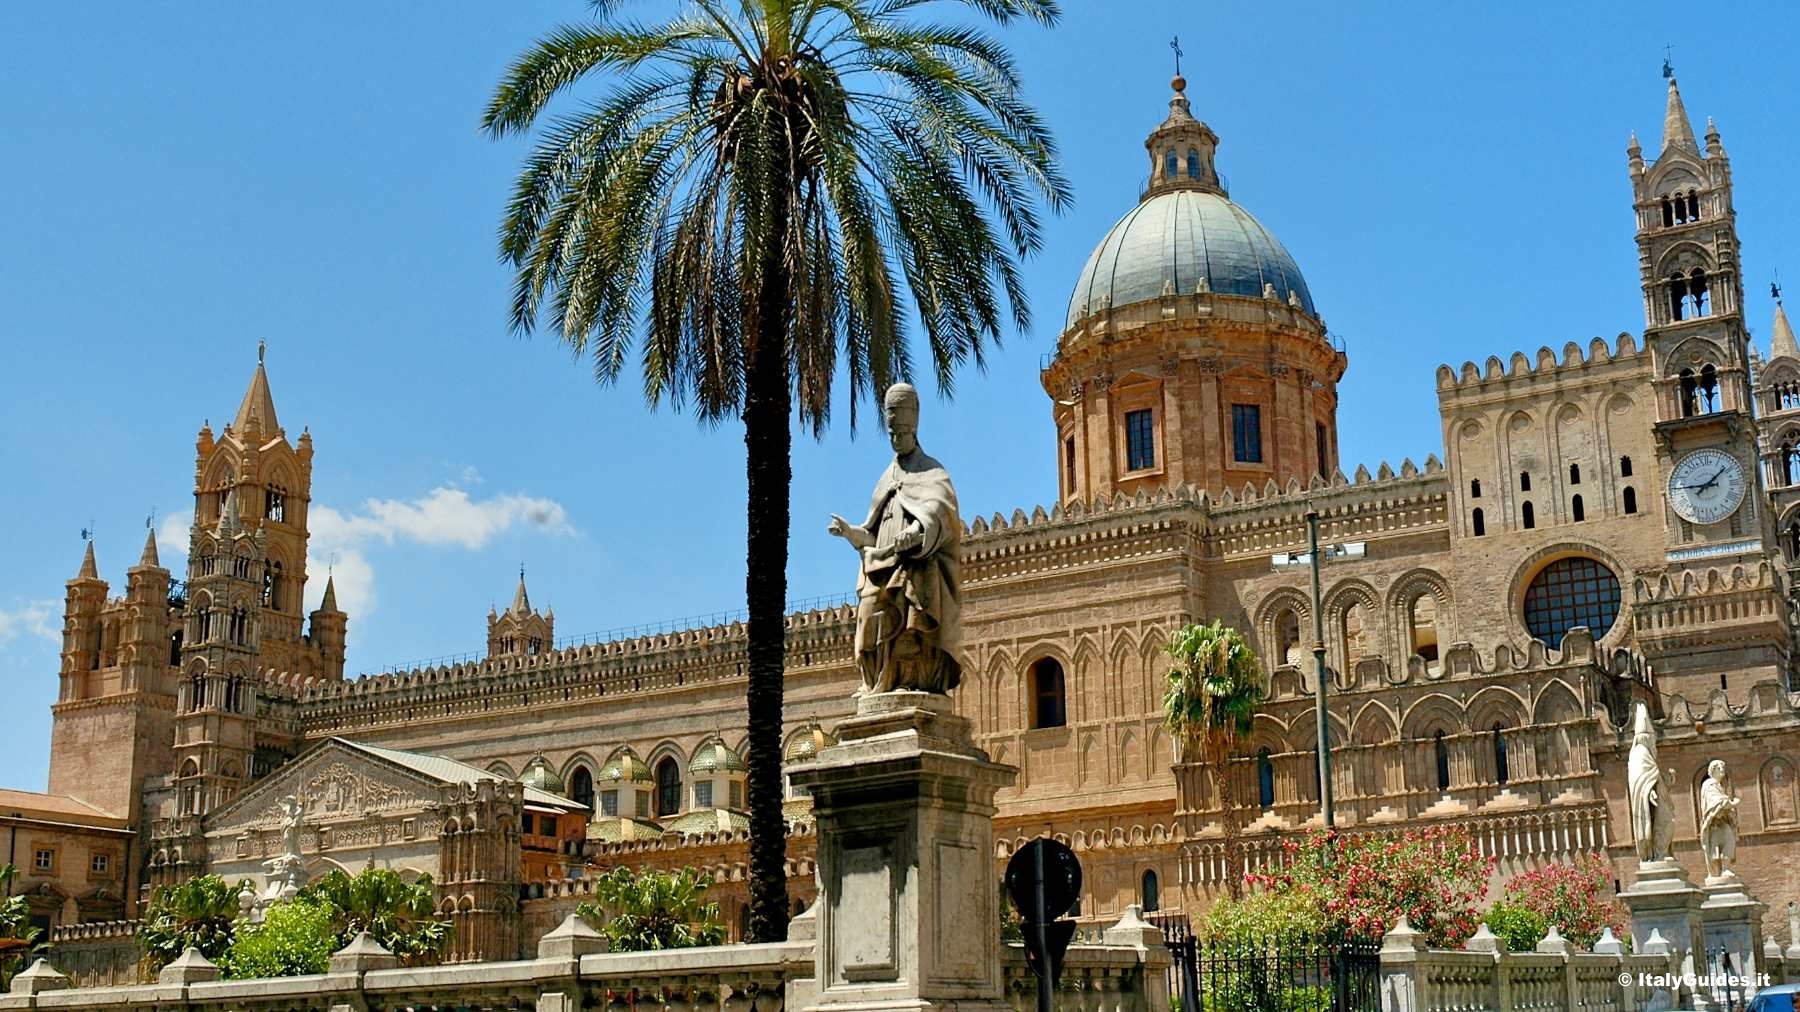 Discover Sicily: Best tourist attractions in Palermo